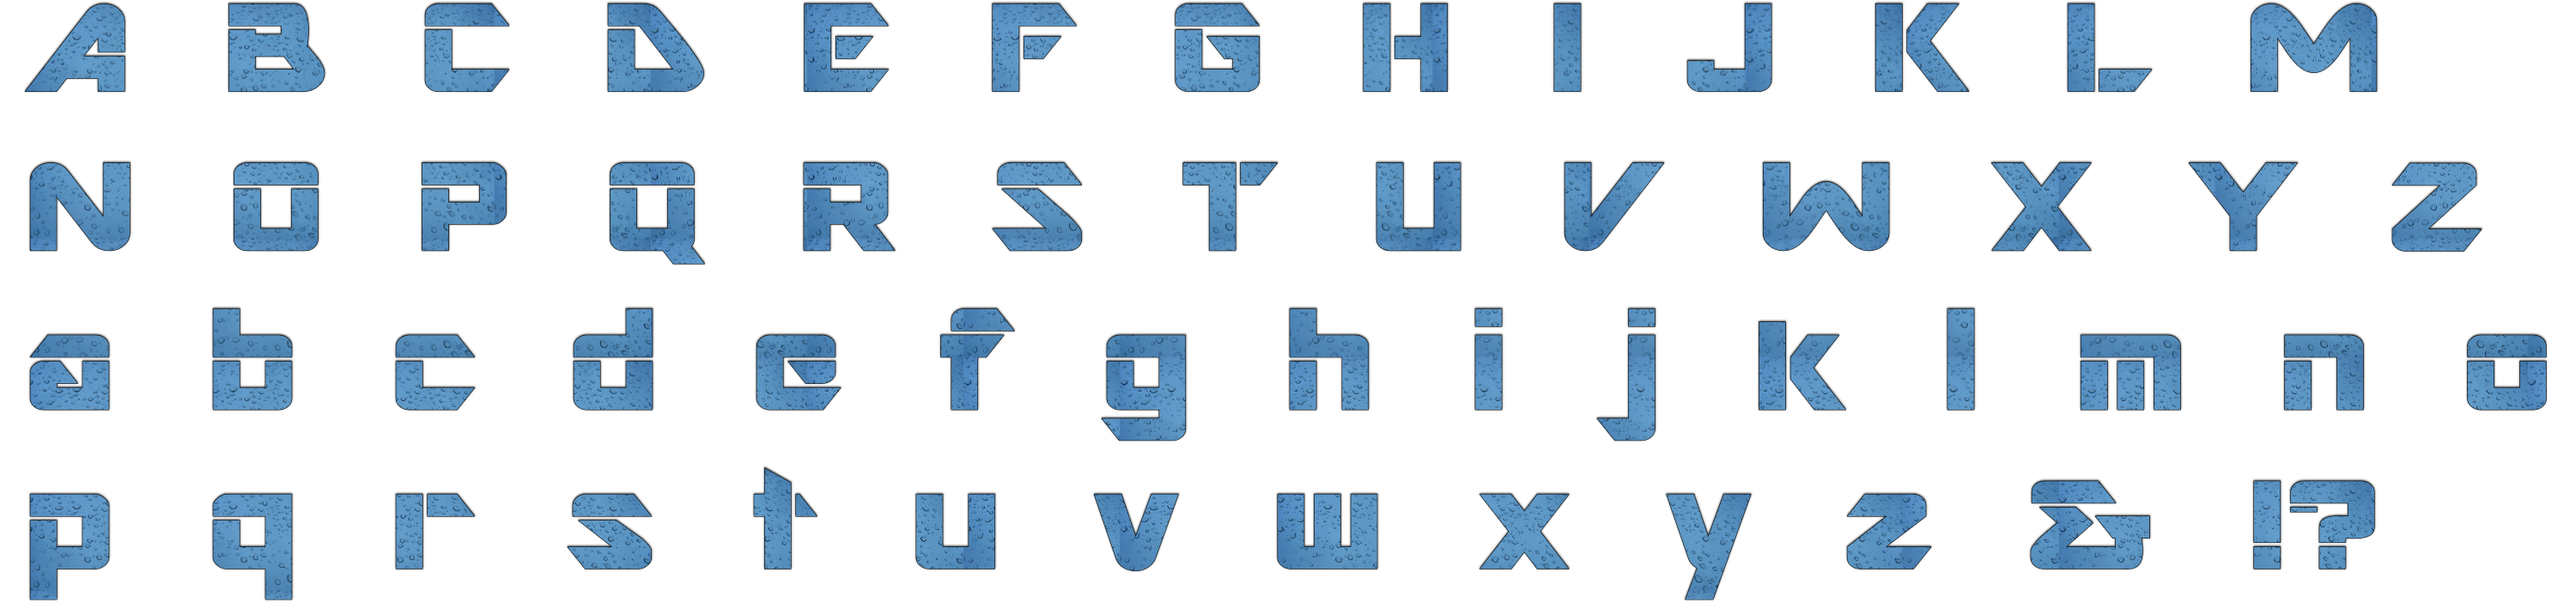 A To Z Alphabet Free HQ Image PNG Image